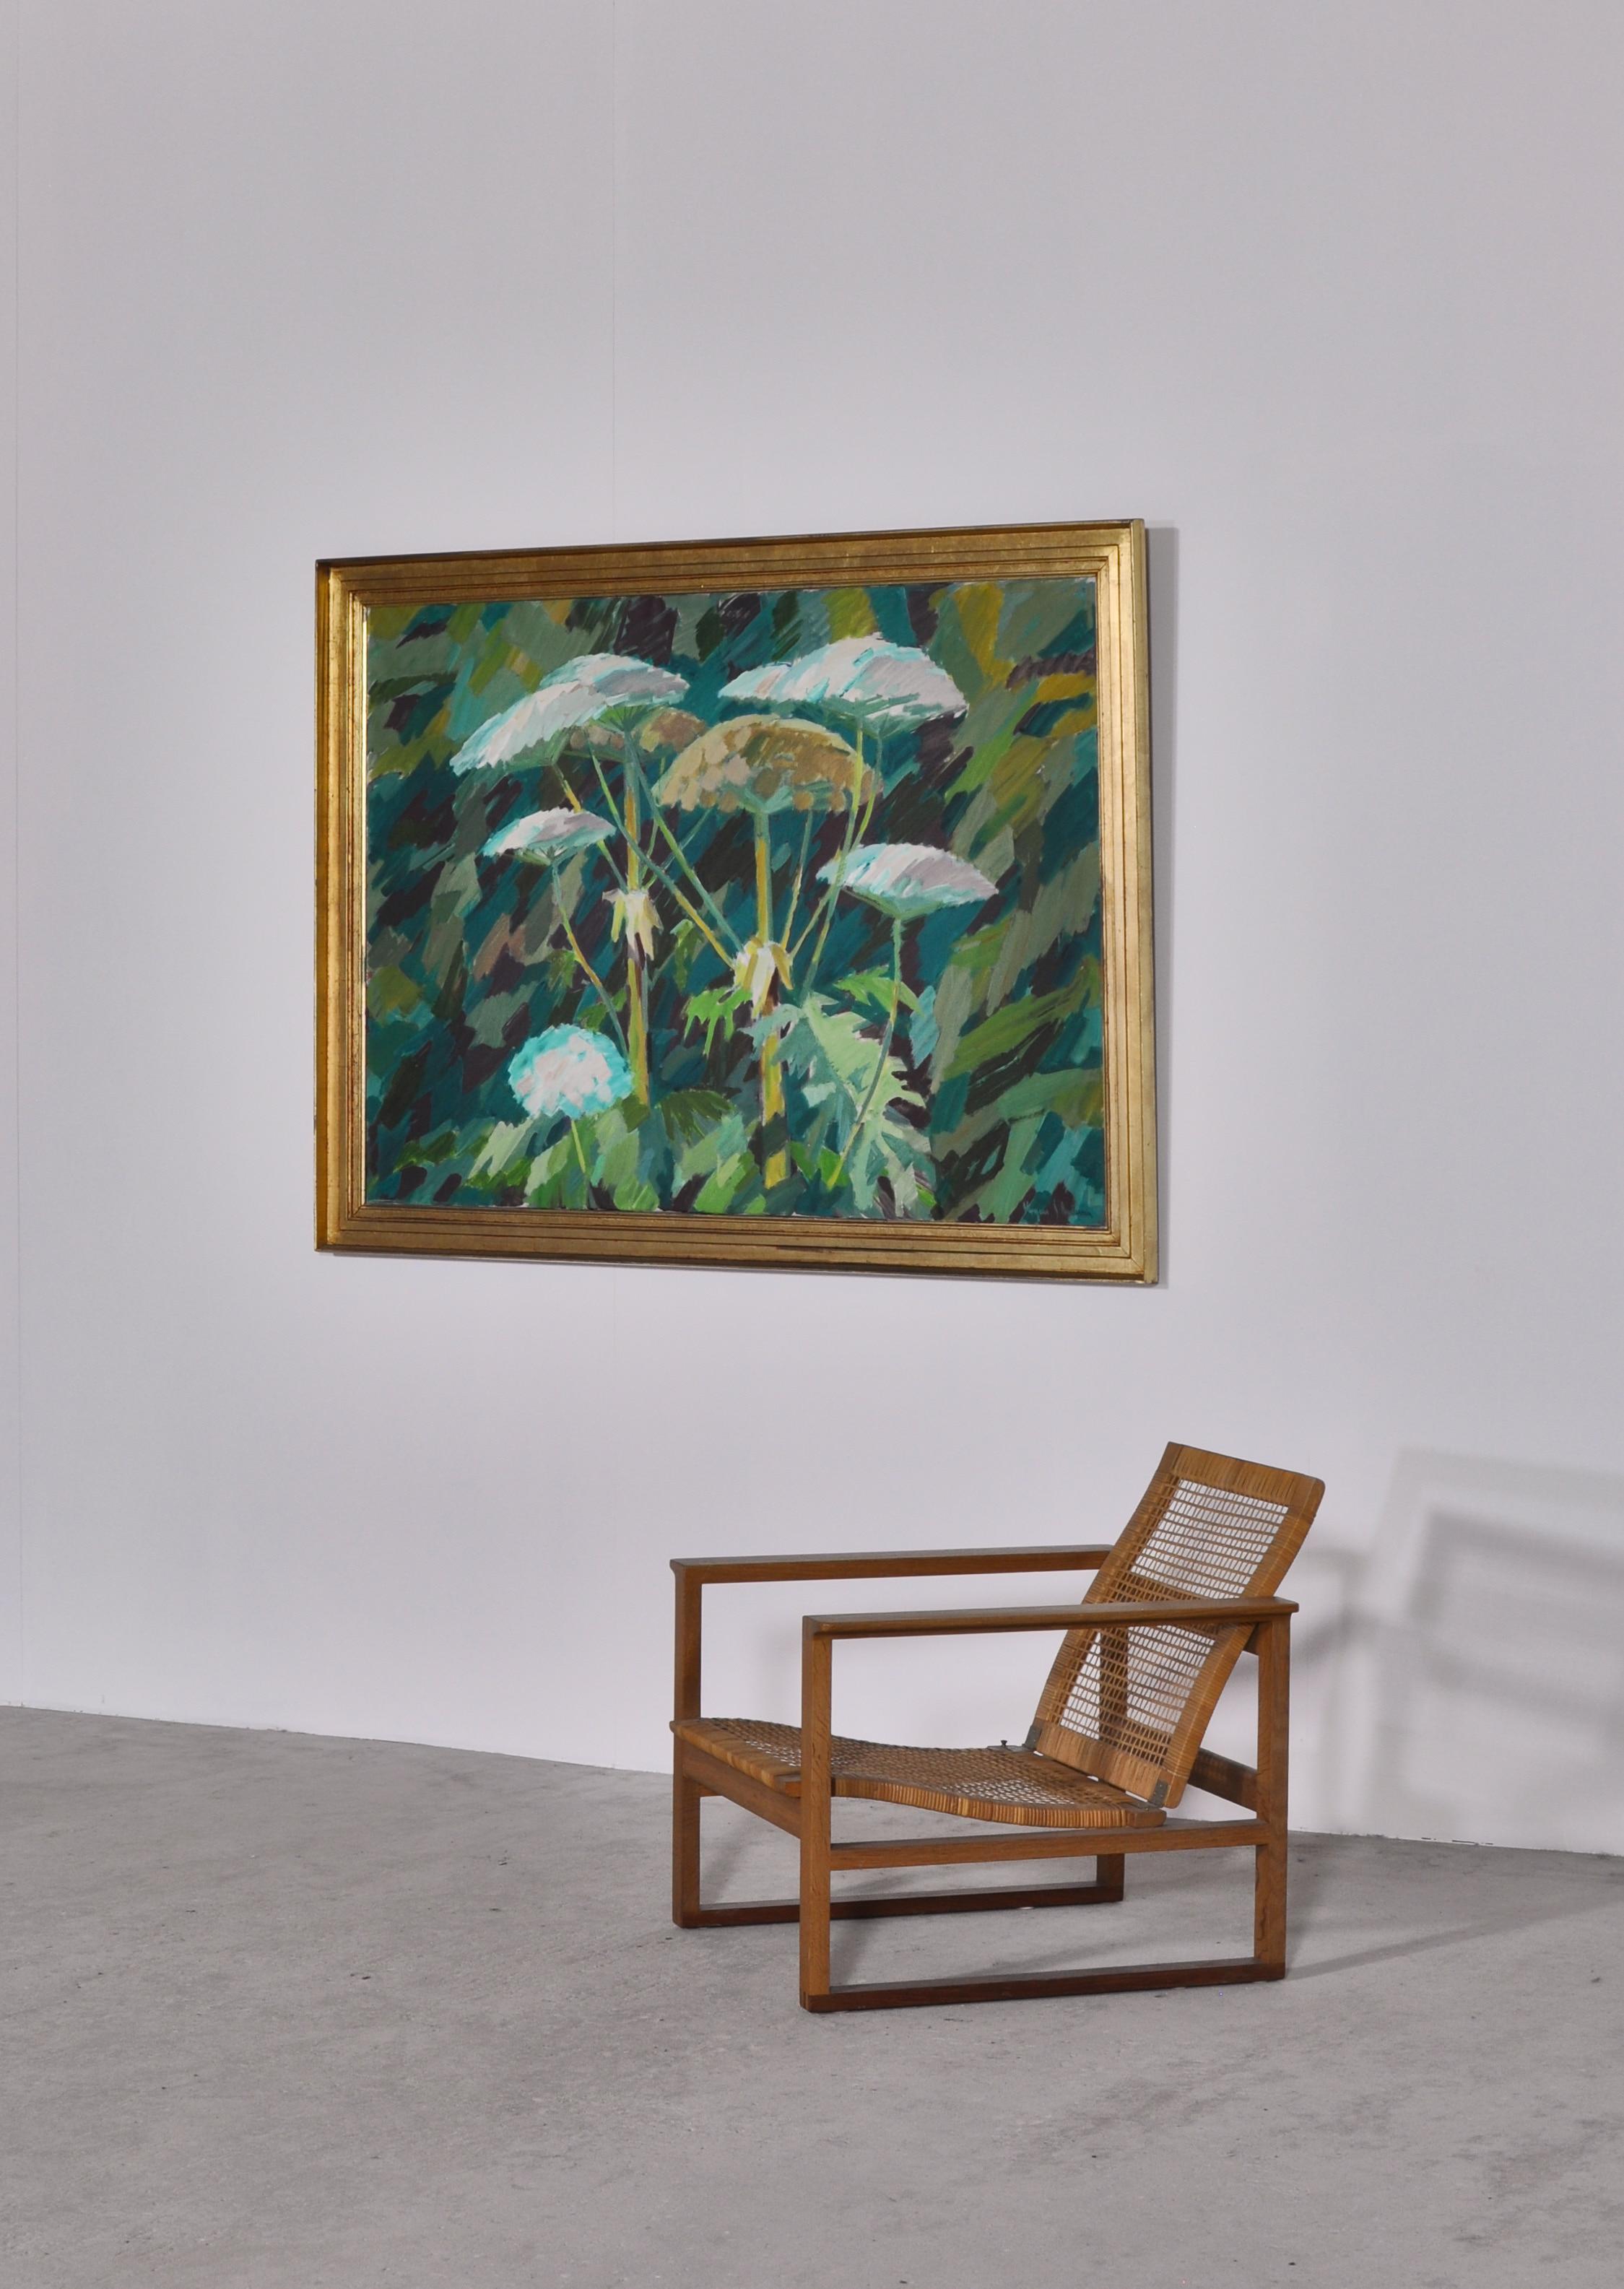 Impressive oil on canvas painting from the 1950s by renown Danish artist Mogens S. Andersen. The motif is semi abstract and depicts Giant Hogweeds in green-bluish colors. The painting is hung in its original gold painted frame.
Among many things